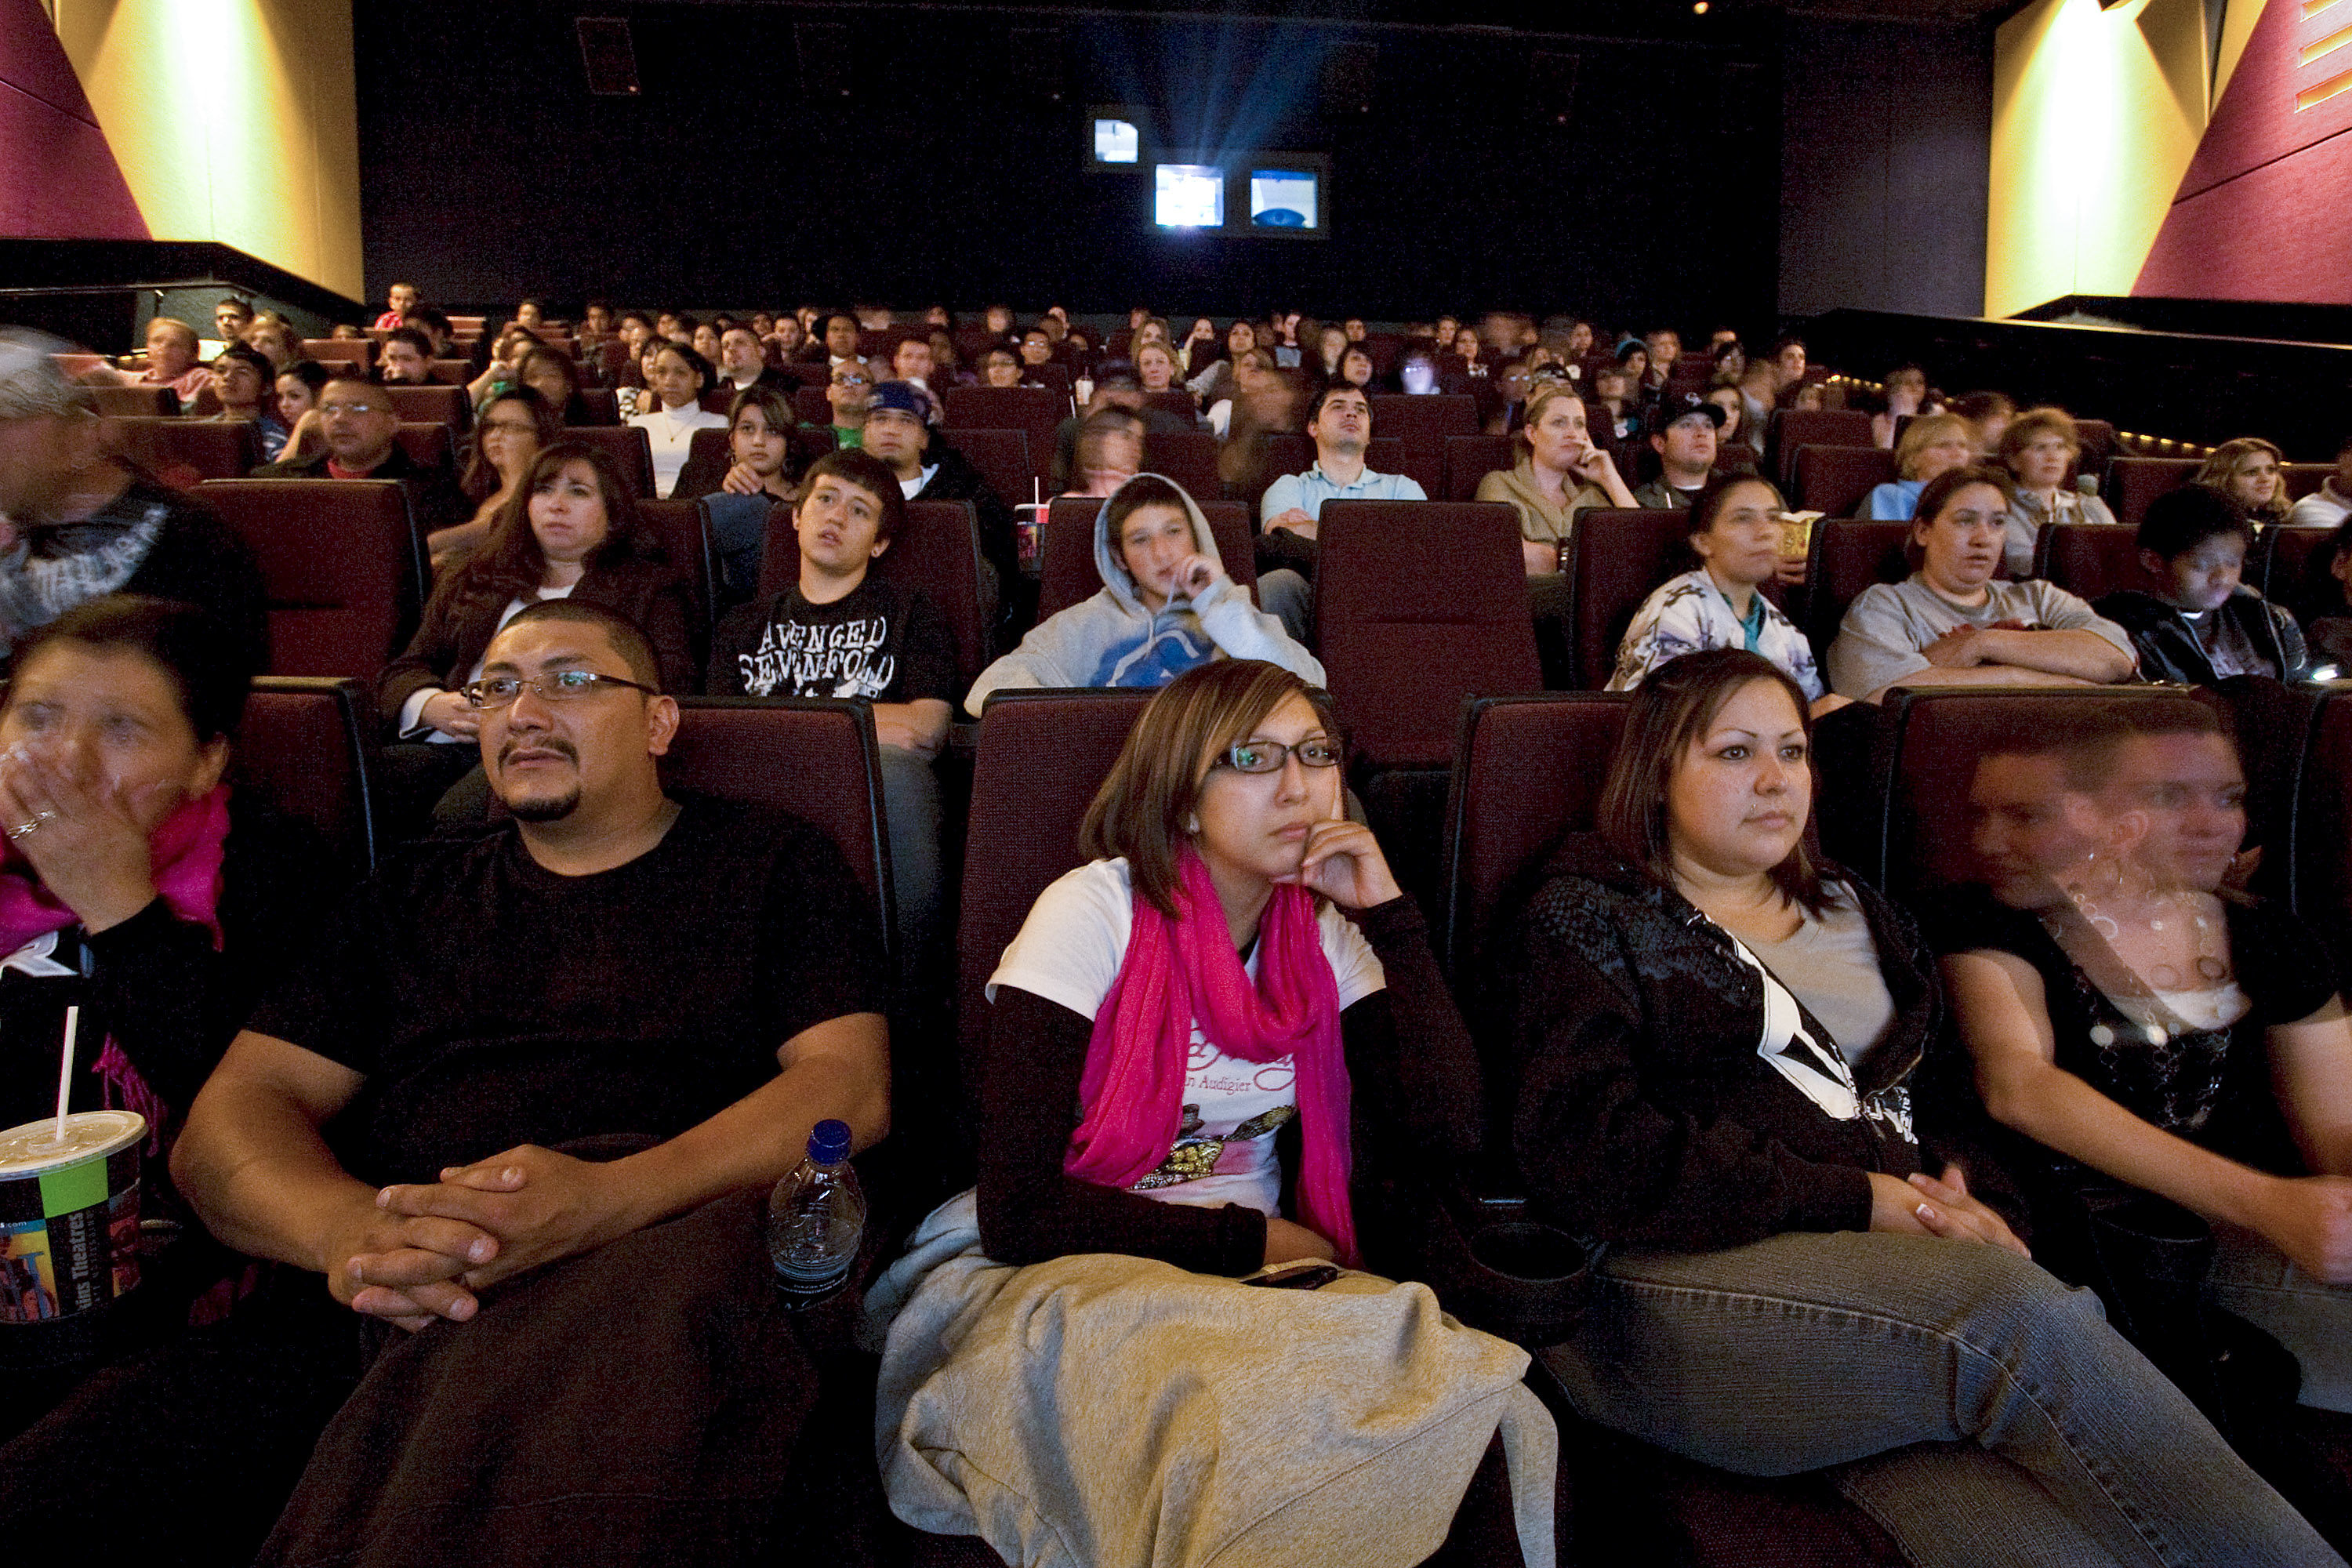 Movie-goers, from left, Michelle Vargas, Rudy Vargas, Brittany Vargas, Janelle Bonilla, and Tiffany McIntosh watch previews at a Harkins movie theater in Denver, Colorado, U.S., on Friday, Oct. 16, 2009. (Bloomberg&mdash;Bloomberg via Getty Images)